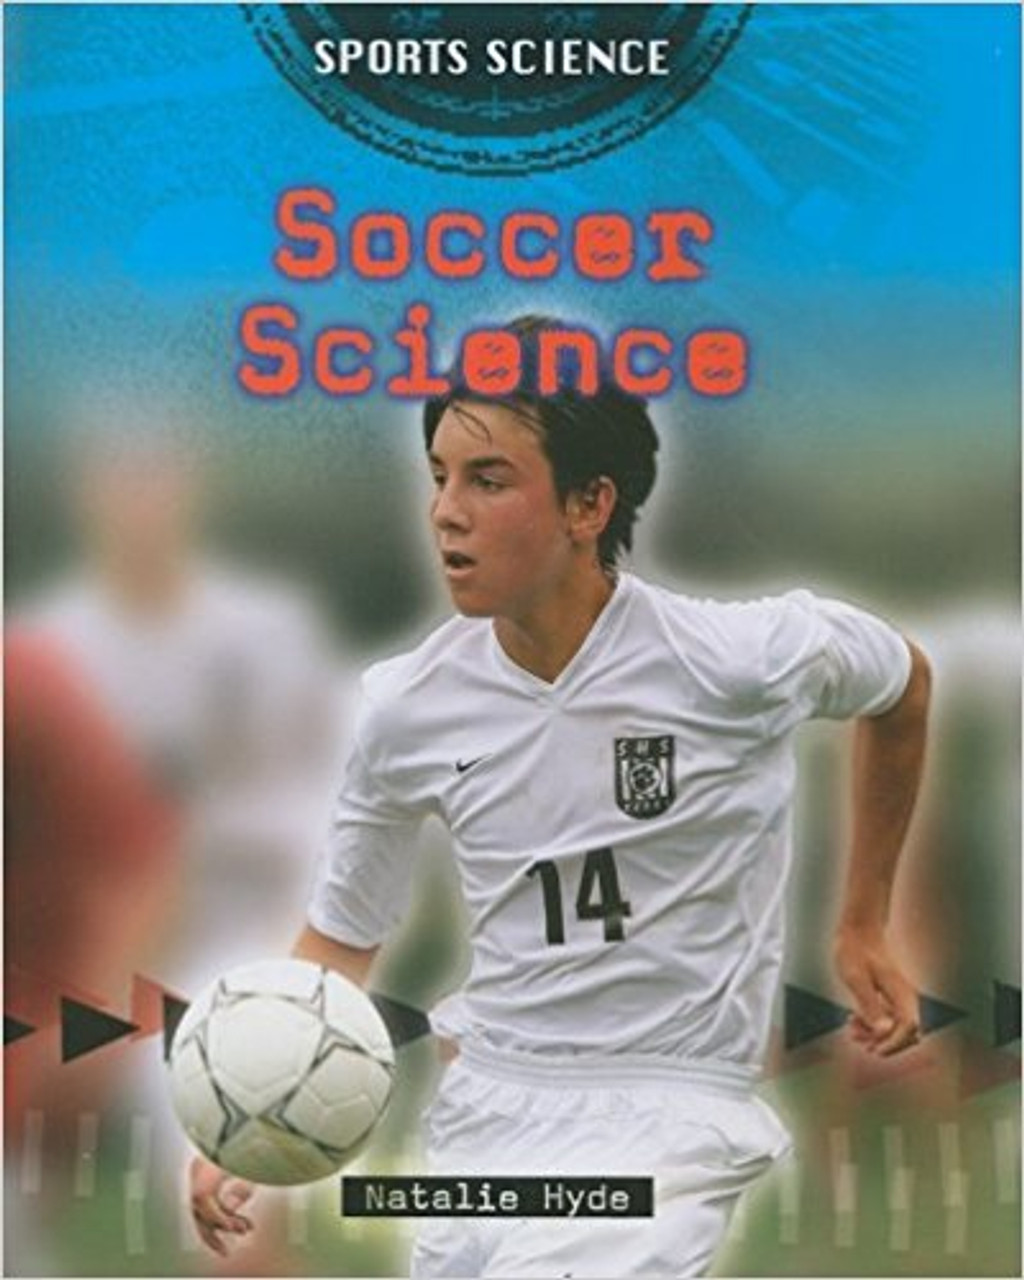 Soccer Science by Natalie Hyde